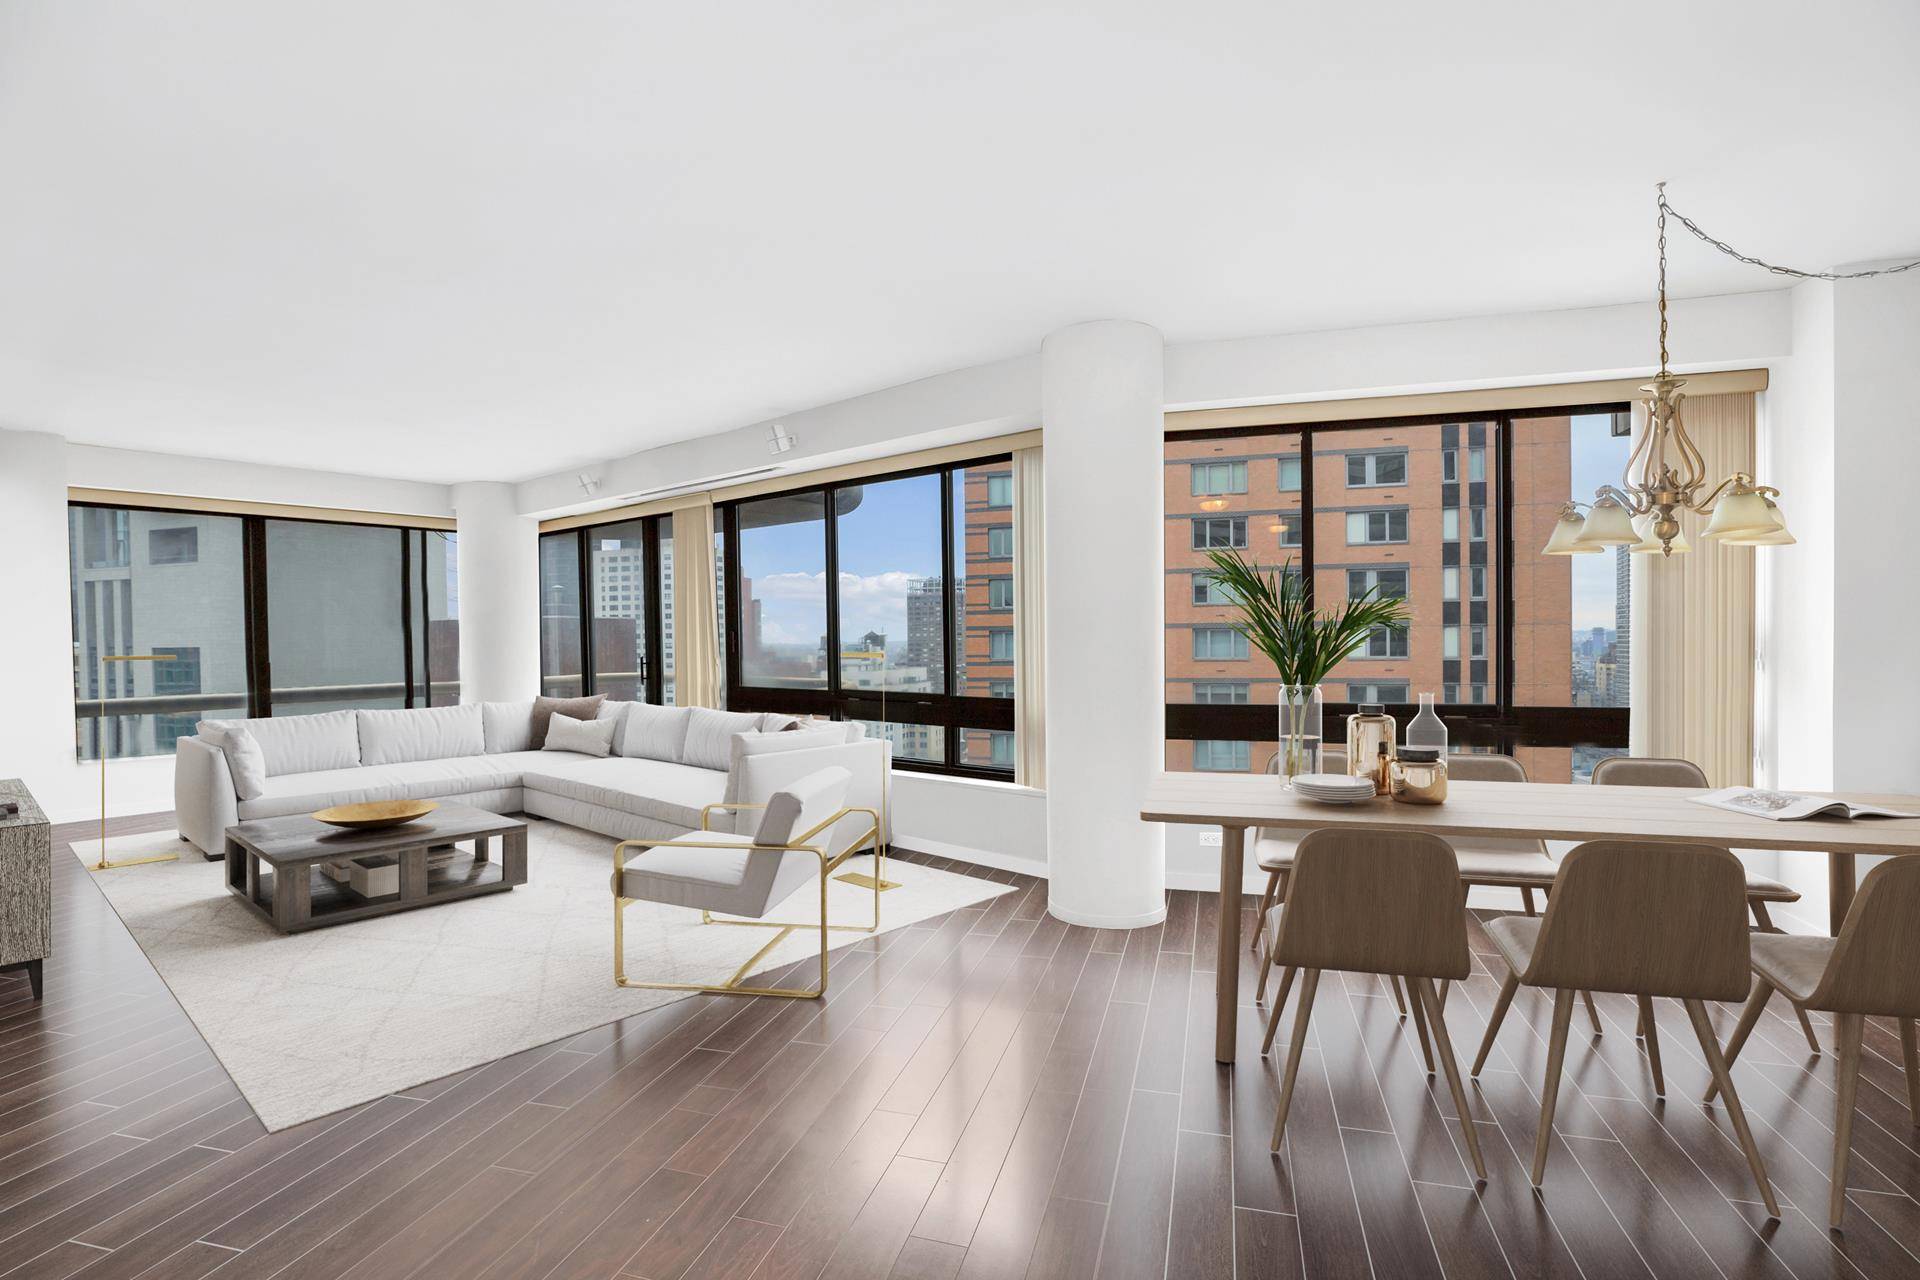 Perched on the northeast corner of the 25th floor, luxuriate in sunlight streaming through floor to ceiling windows, a stunning 2 bedroom home awaits.